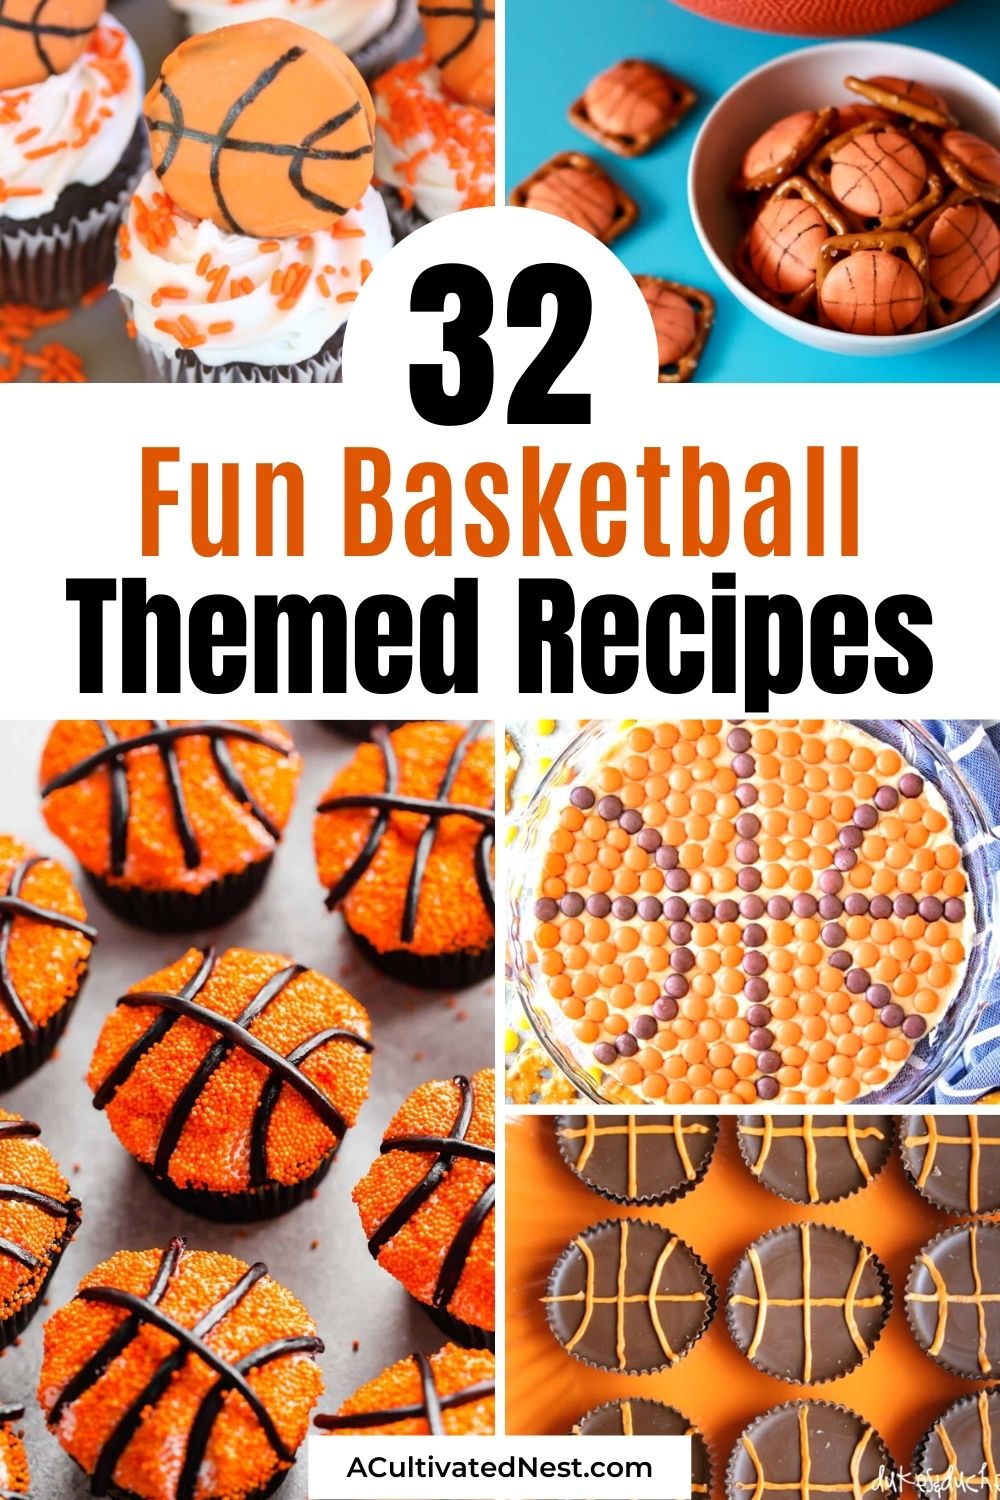 32 Fun Basketball Themed Recipes- If you want some fun basketball themed food for a basketball game watch party or a basketball themed birthday, then you'll love these fun basketball themed recipes! | #basketball #sportsRecipe #dessertRecipes #watchParty #ACultivatedNest